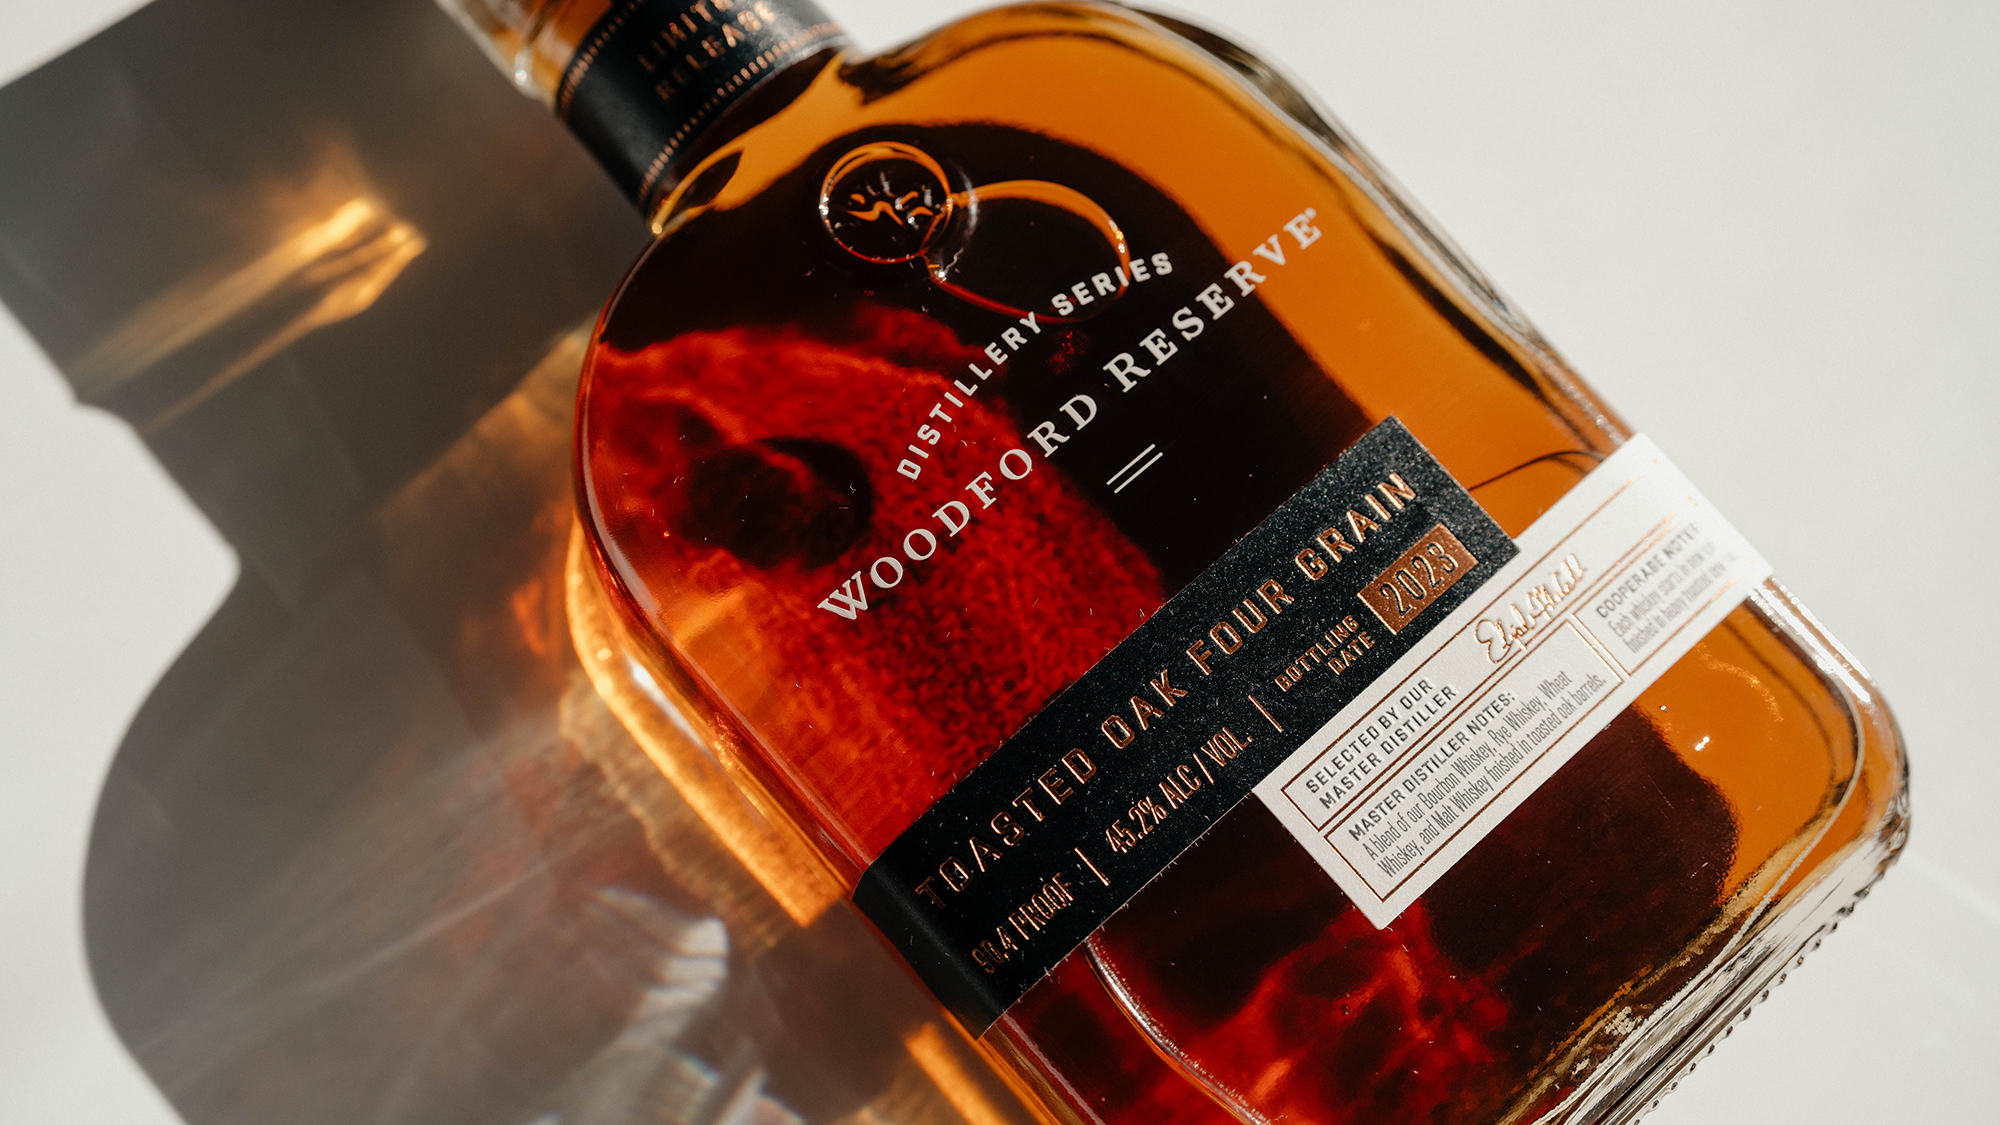 Woodford Reserve Toasted Oak Four Grain